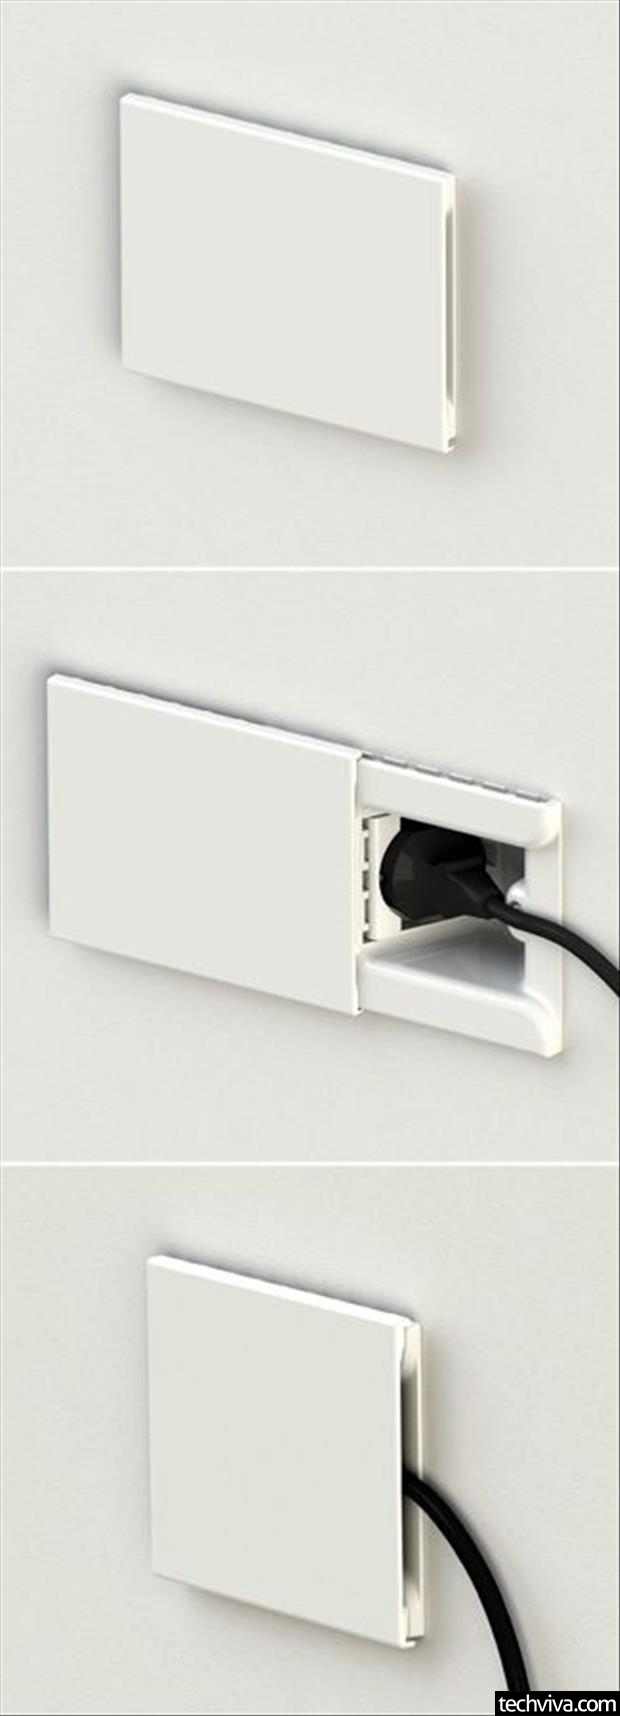 plugin-outlet-covers